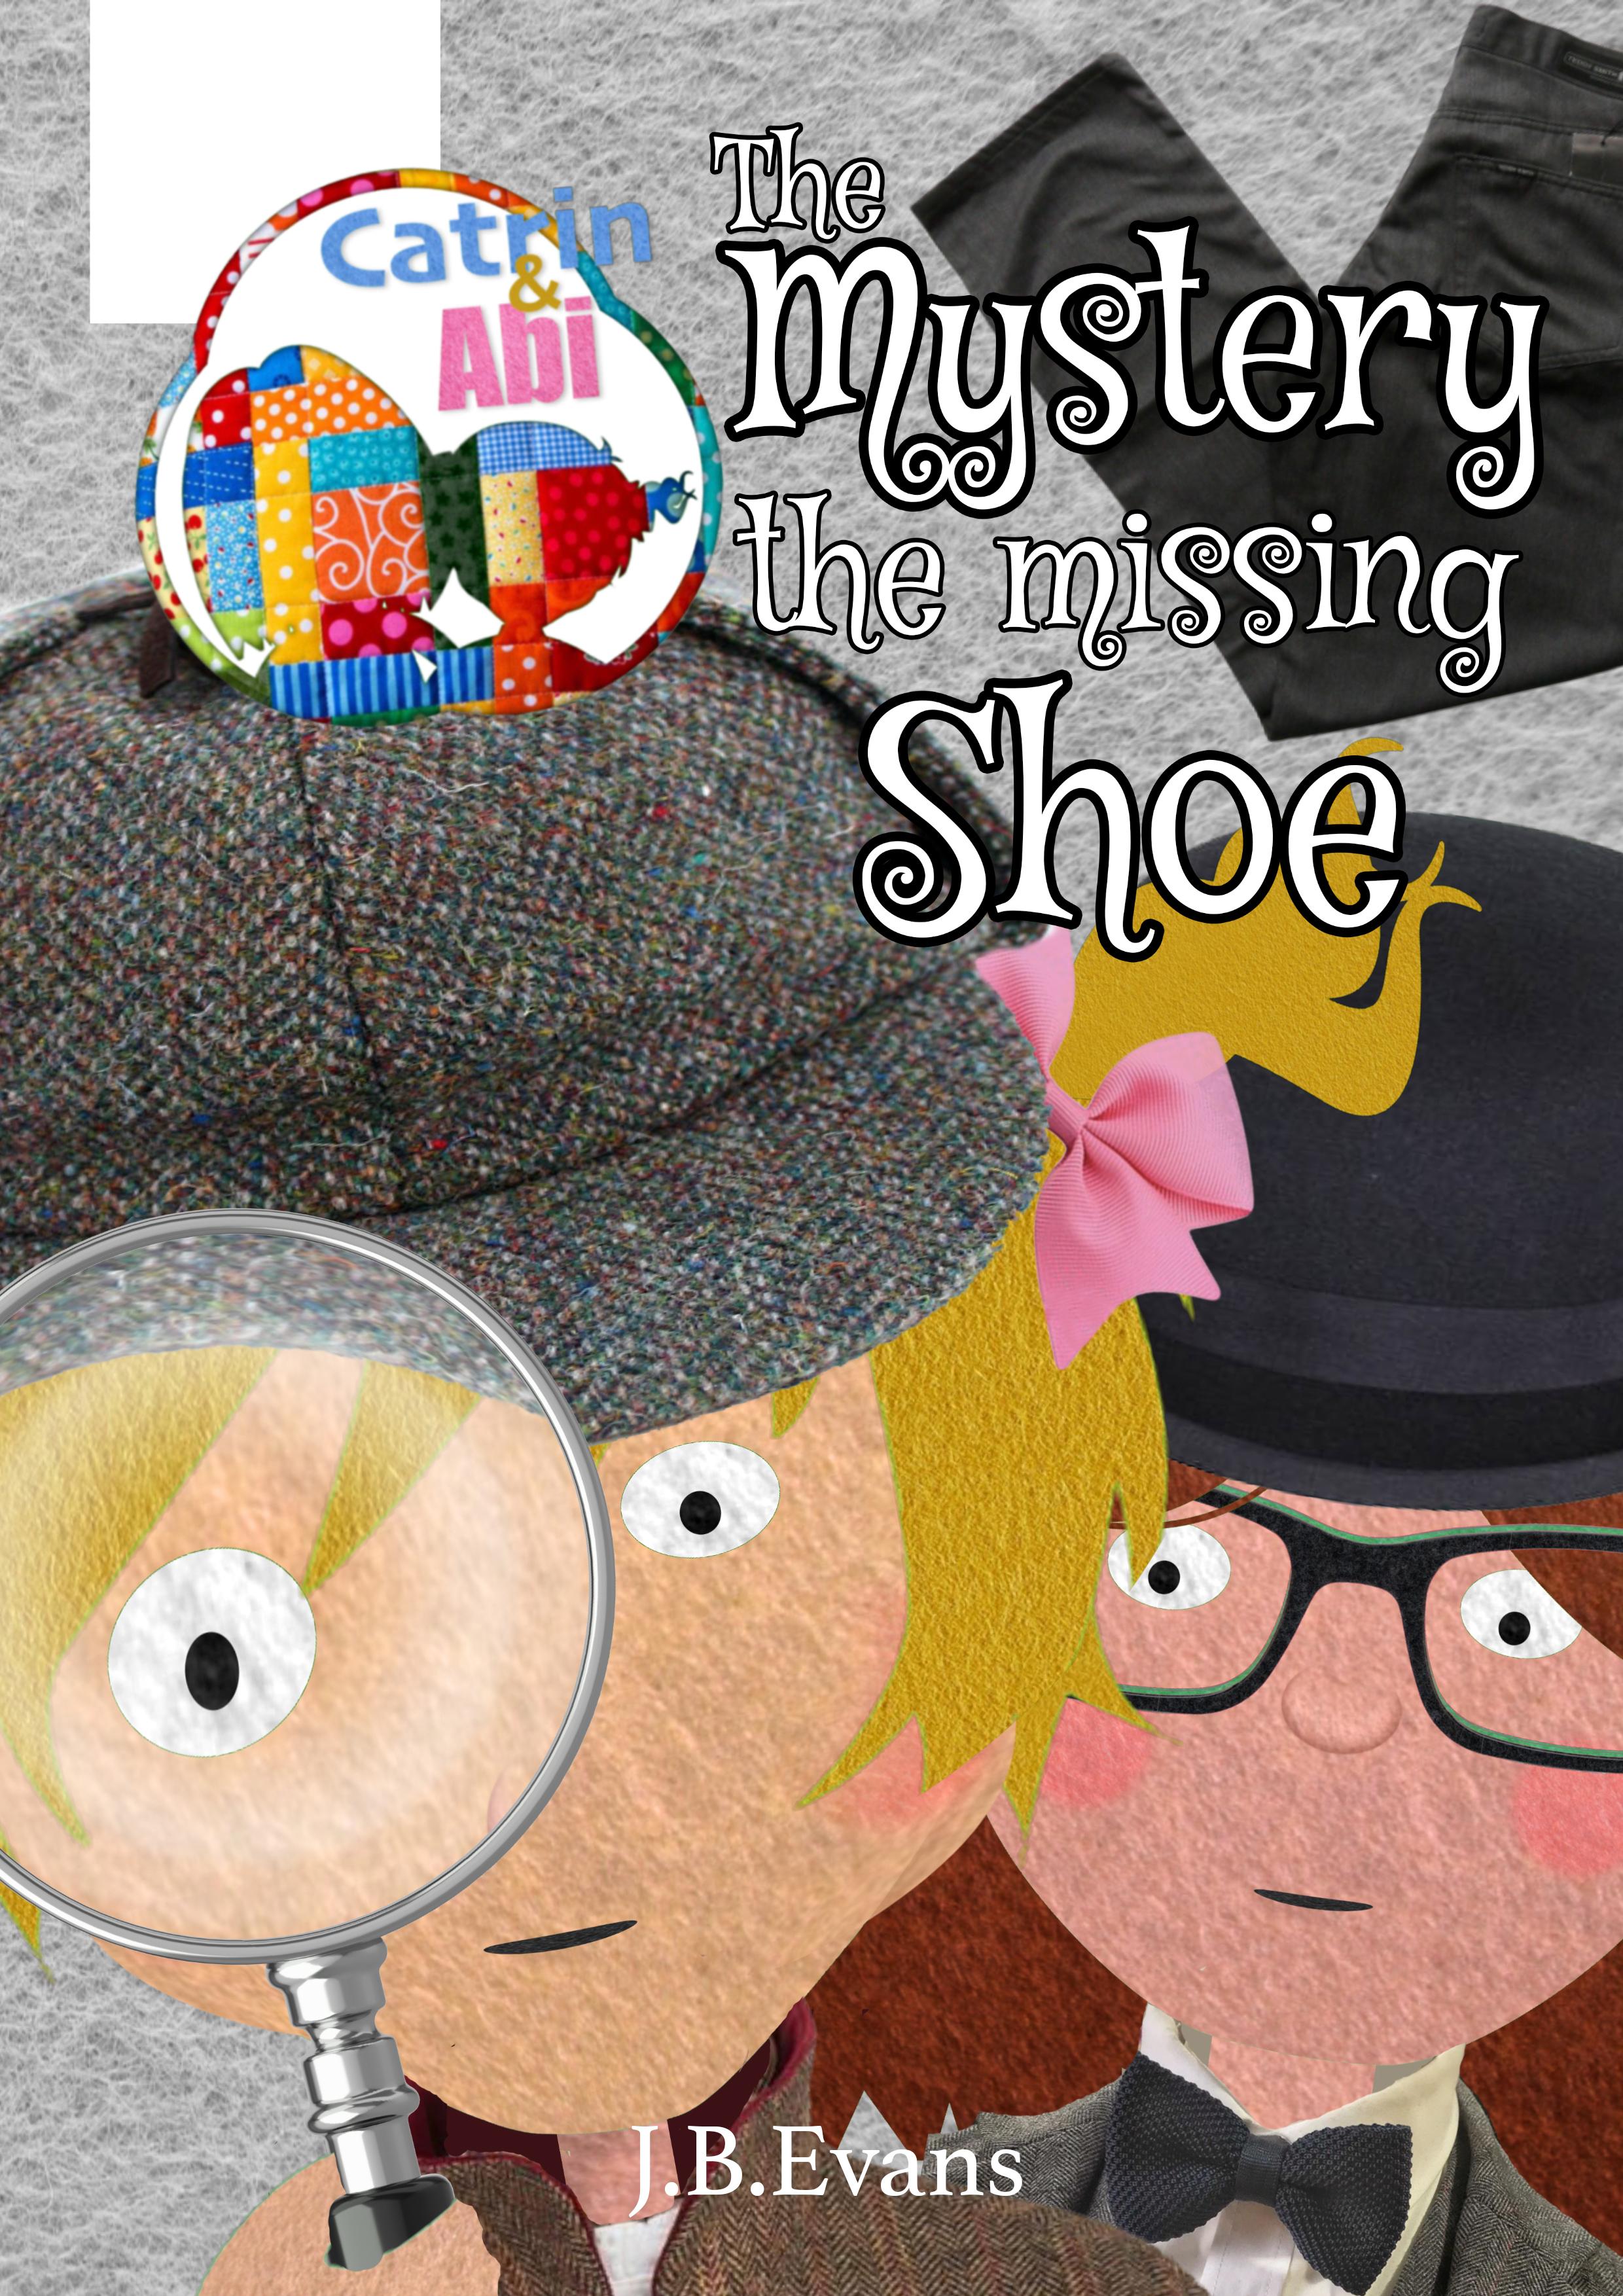 The mystery of the missing shoe